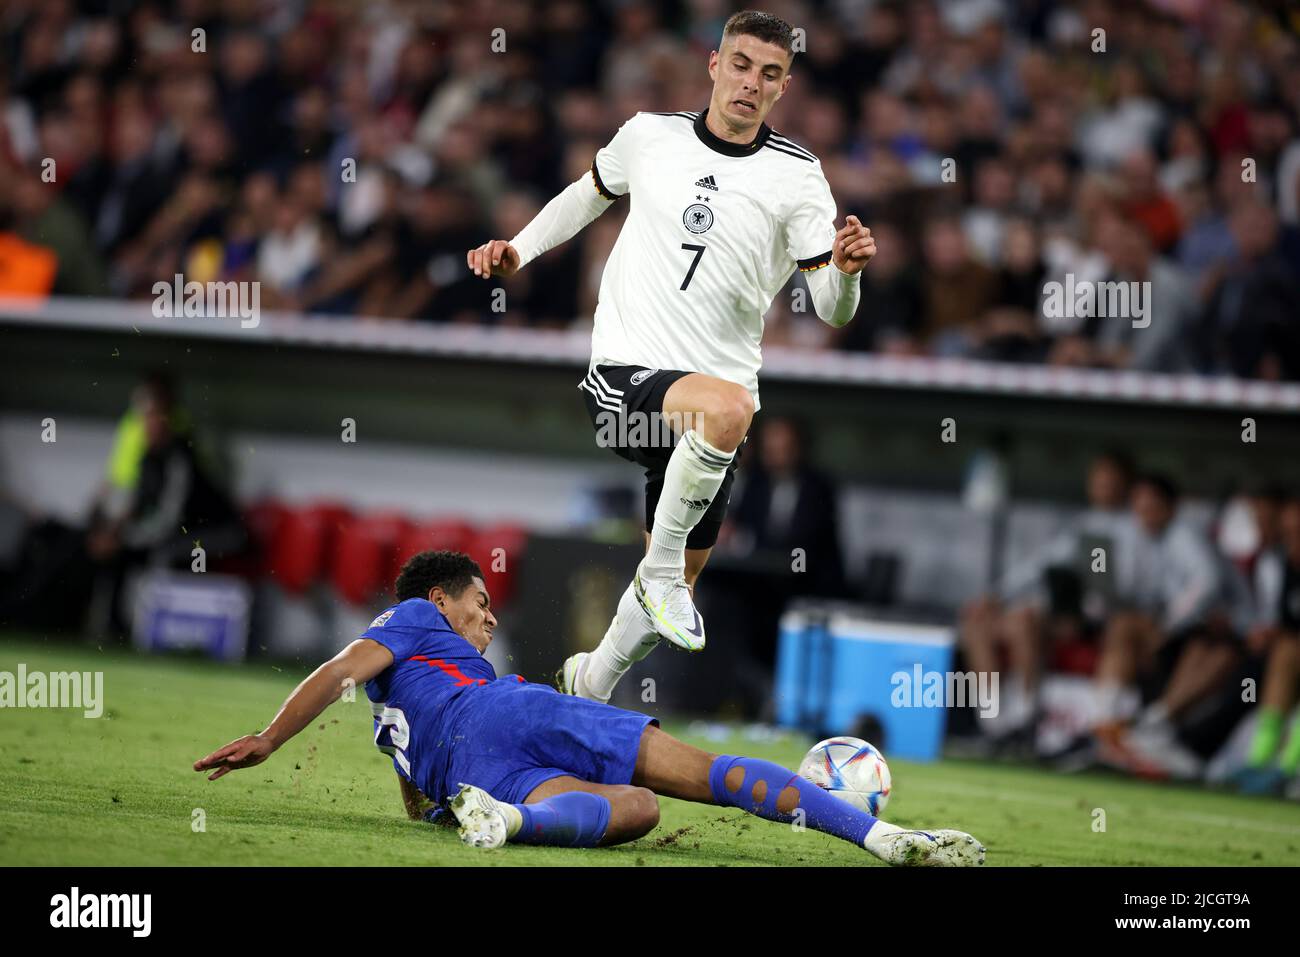 Kai Havertz of germany 06 Jude Bellingham of England  MUNICH, GERMANY - JUNE 07:  UEFA Nations League League A Group 3 match between Germany and England at Allianz Arena on June 07, 2022 in Munich, Germany. Nations League Deutschland England  © diebilderwelt / Alamy Stock Stock Photo